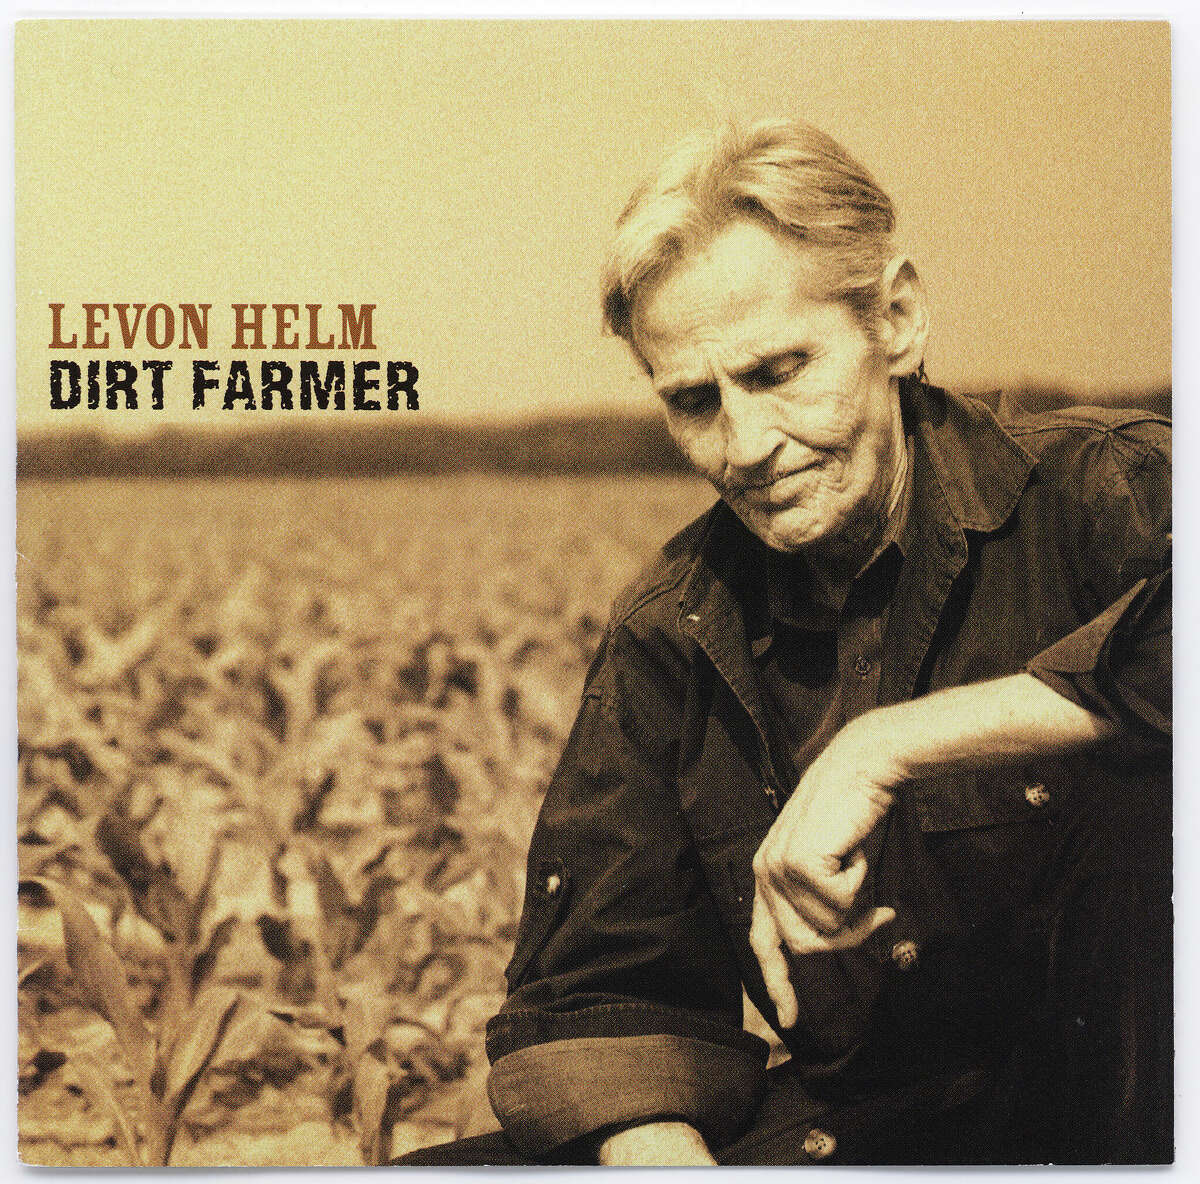 Woodstock resident Levon Helm, the former drummer for The Band, regained his voice after losing it from throat cancer, and recorded “Dirt Farmer.”